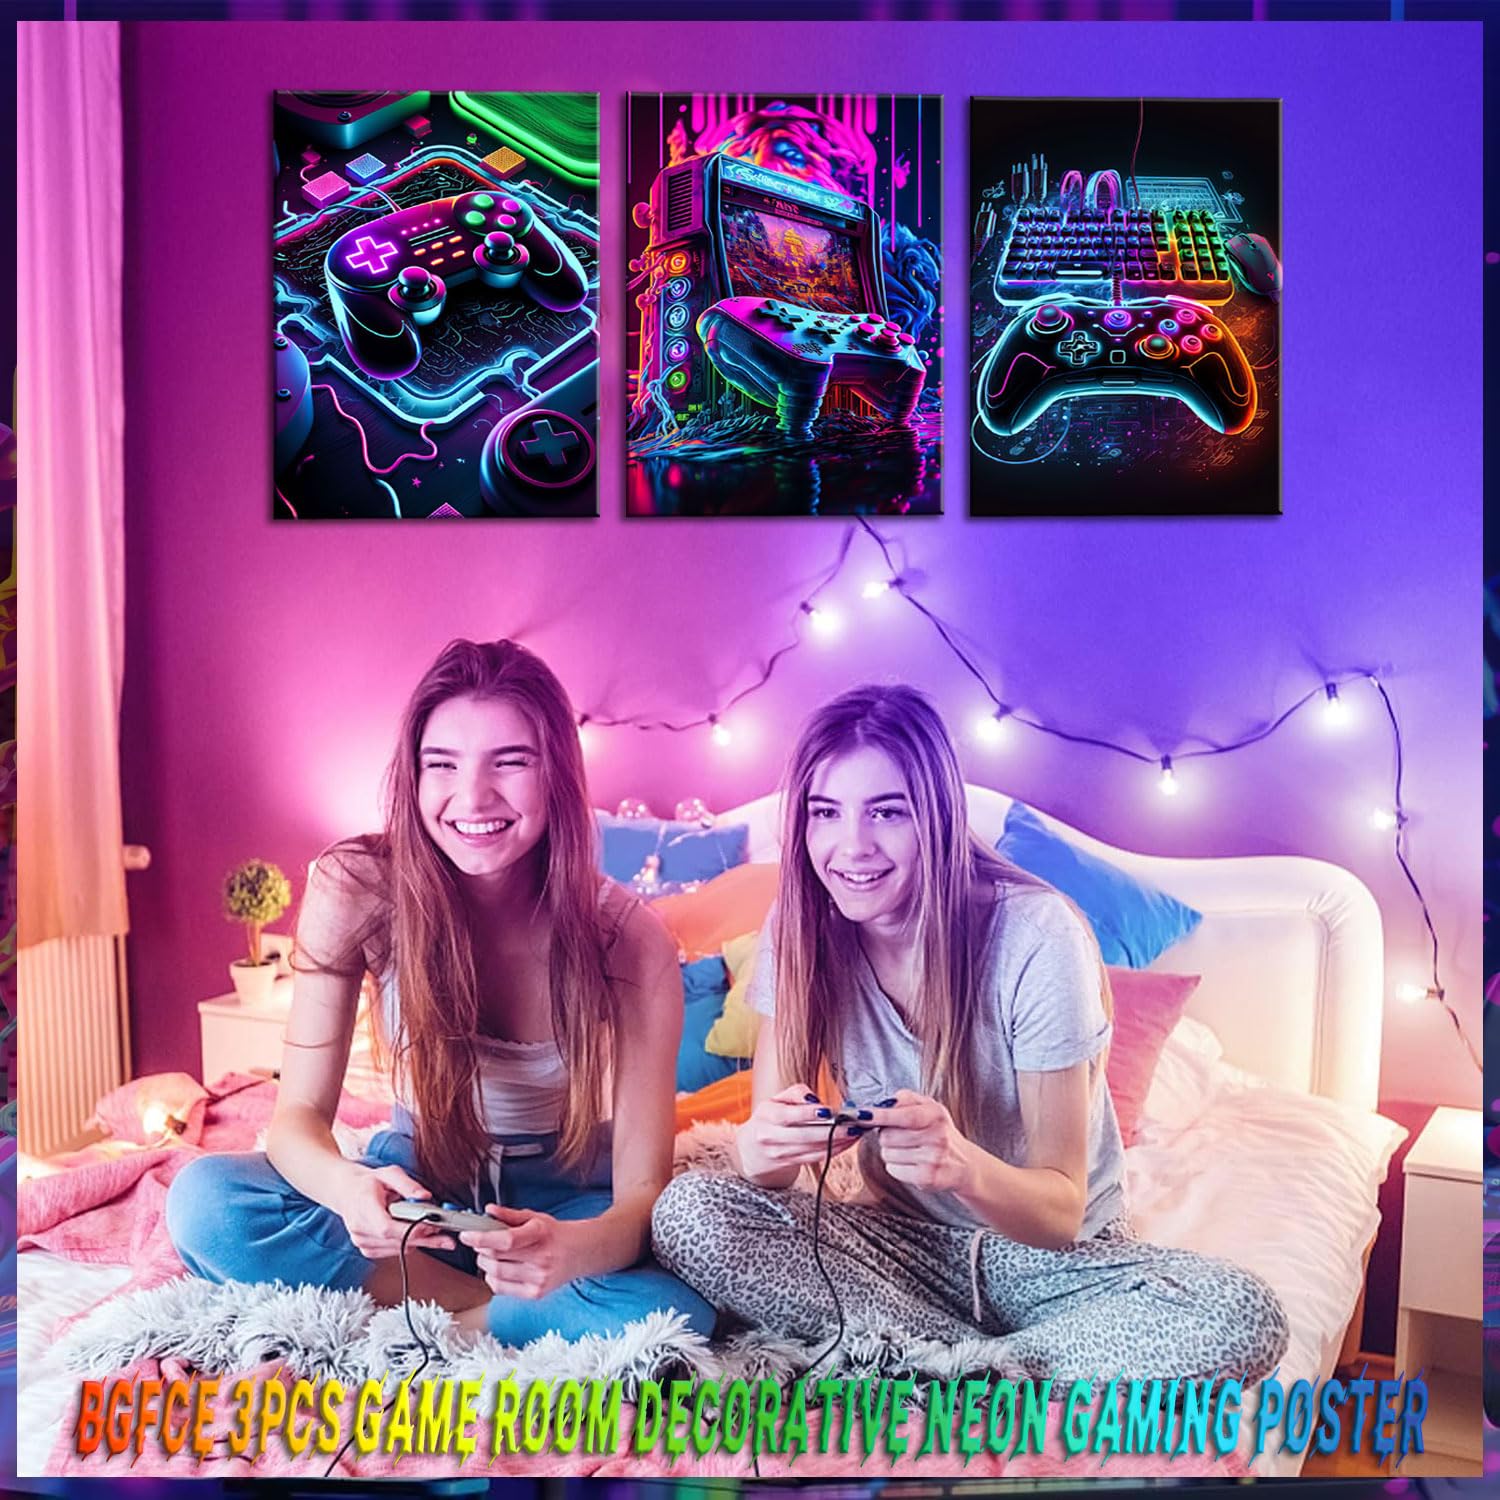 BGFCE 3pcs Game Room Decor Neon Gaming Posters Wall Art Gamer Accessories Theme Canvas Print Game Console Painting Picture for Children Youth Game Boys Bedroom Teen Wall Decor Unframed 12"x16"x3 - amzGamess